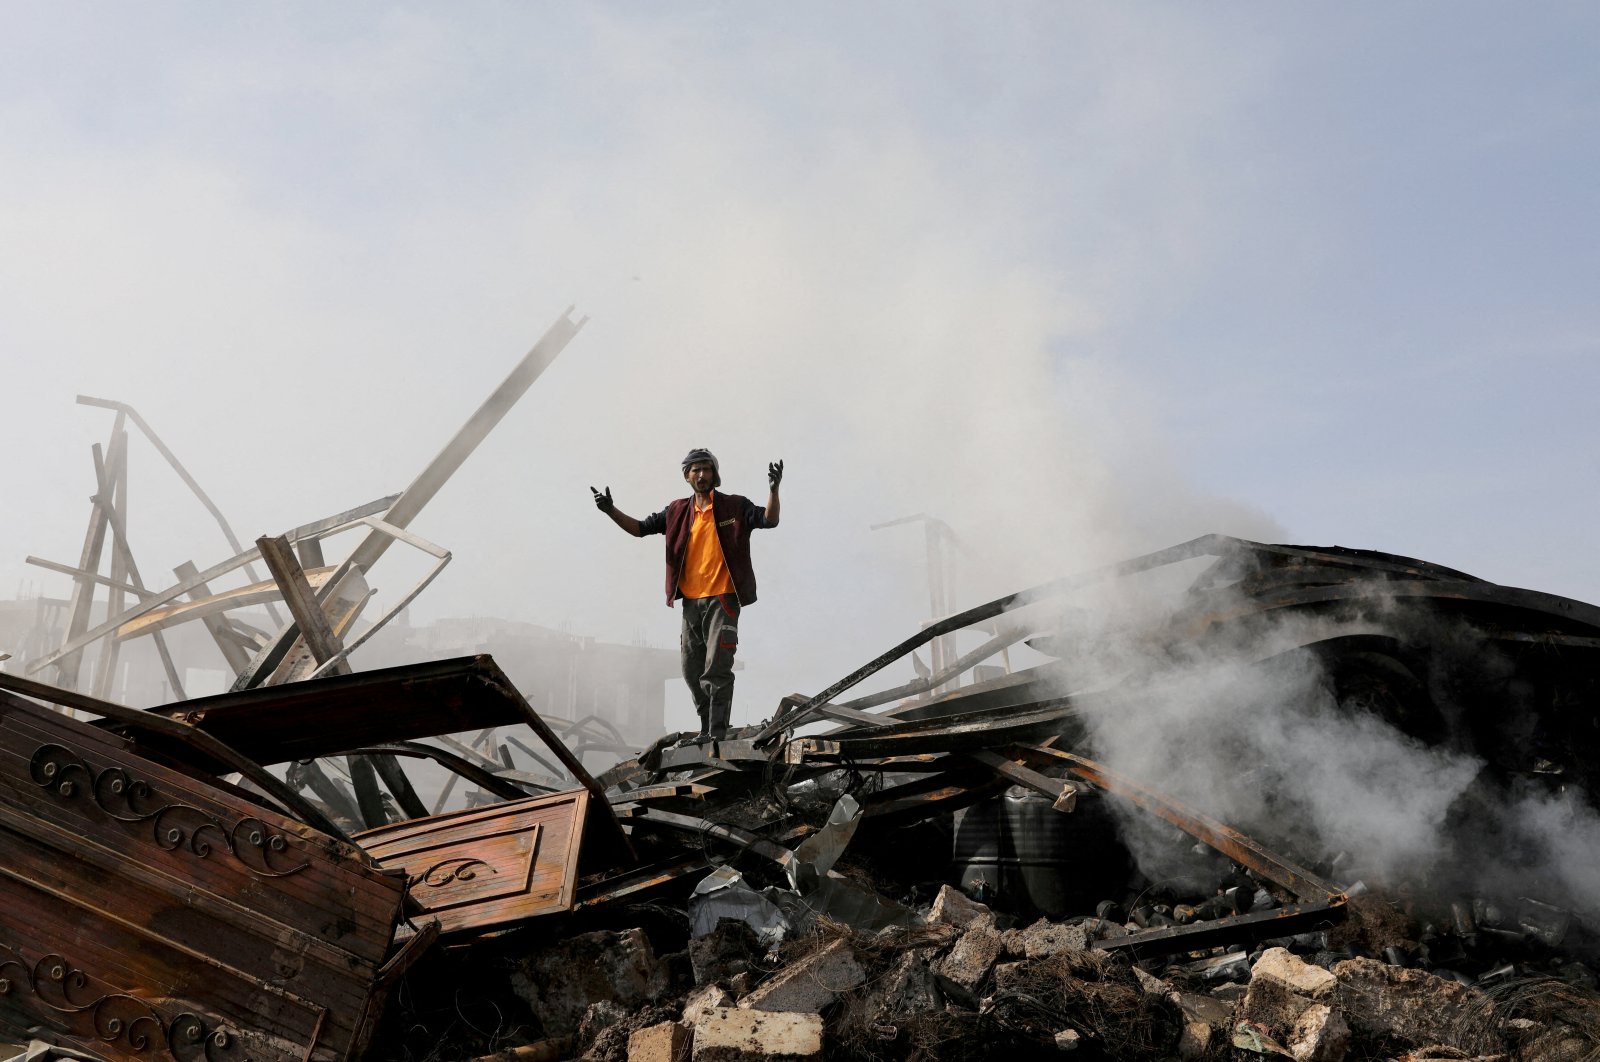 A worker reacts as he stands on the wreckage of a vehicle oil and tires store hit by Saudi-led airstrikes, in Sanaa, Yemen July 2, 2020. (Reuters Photo)